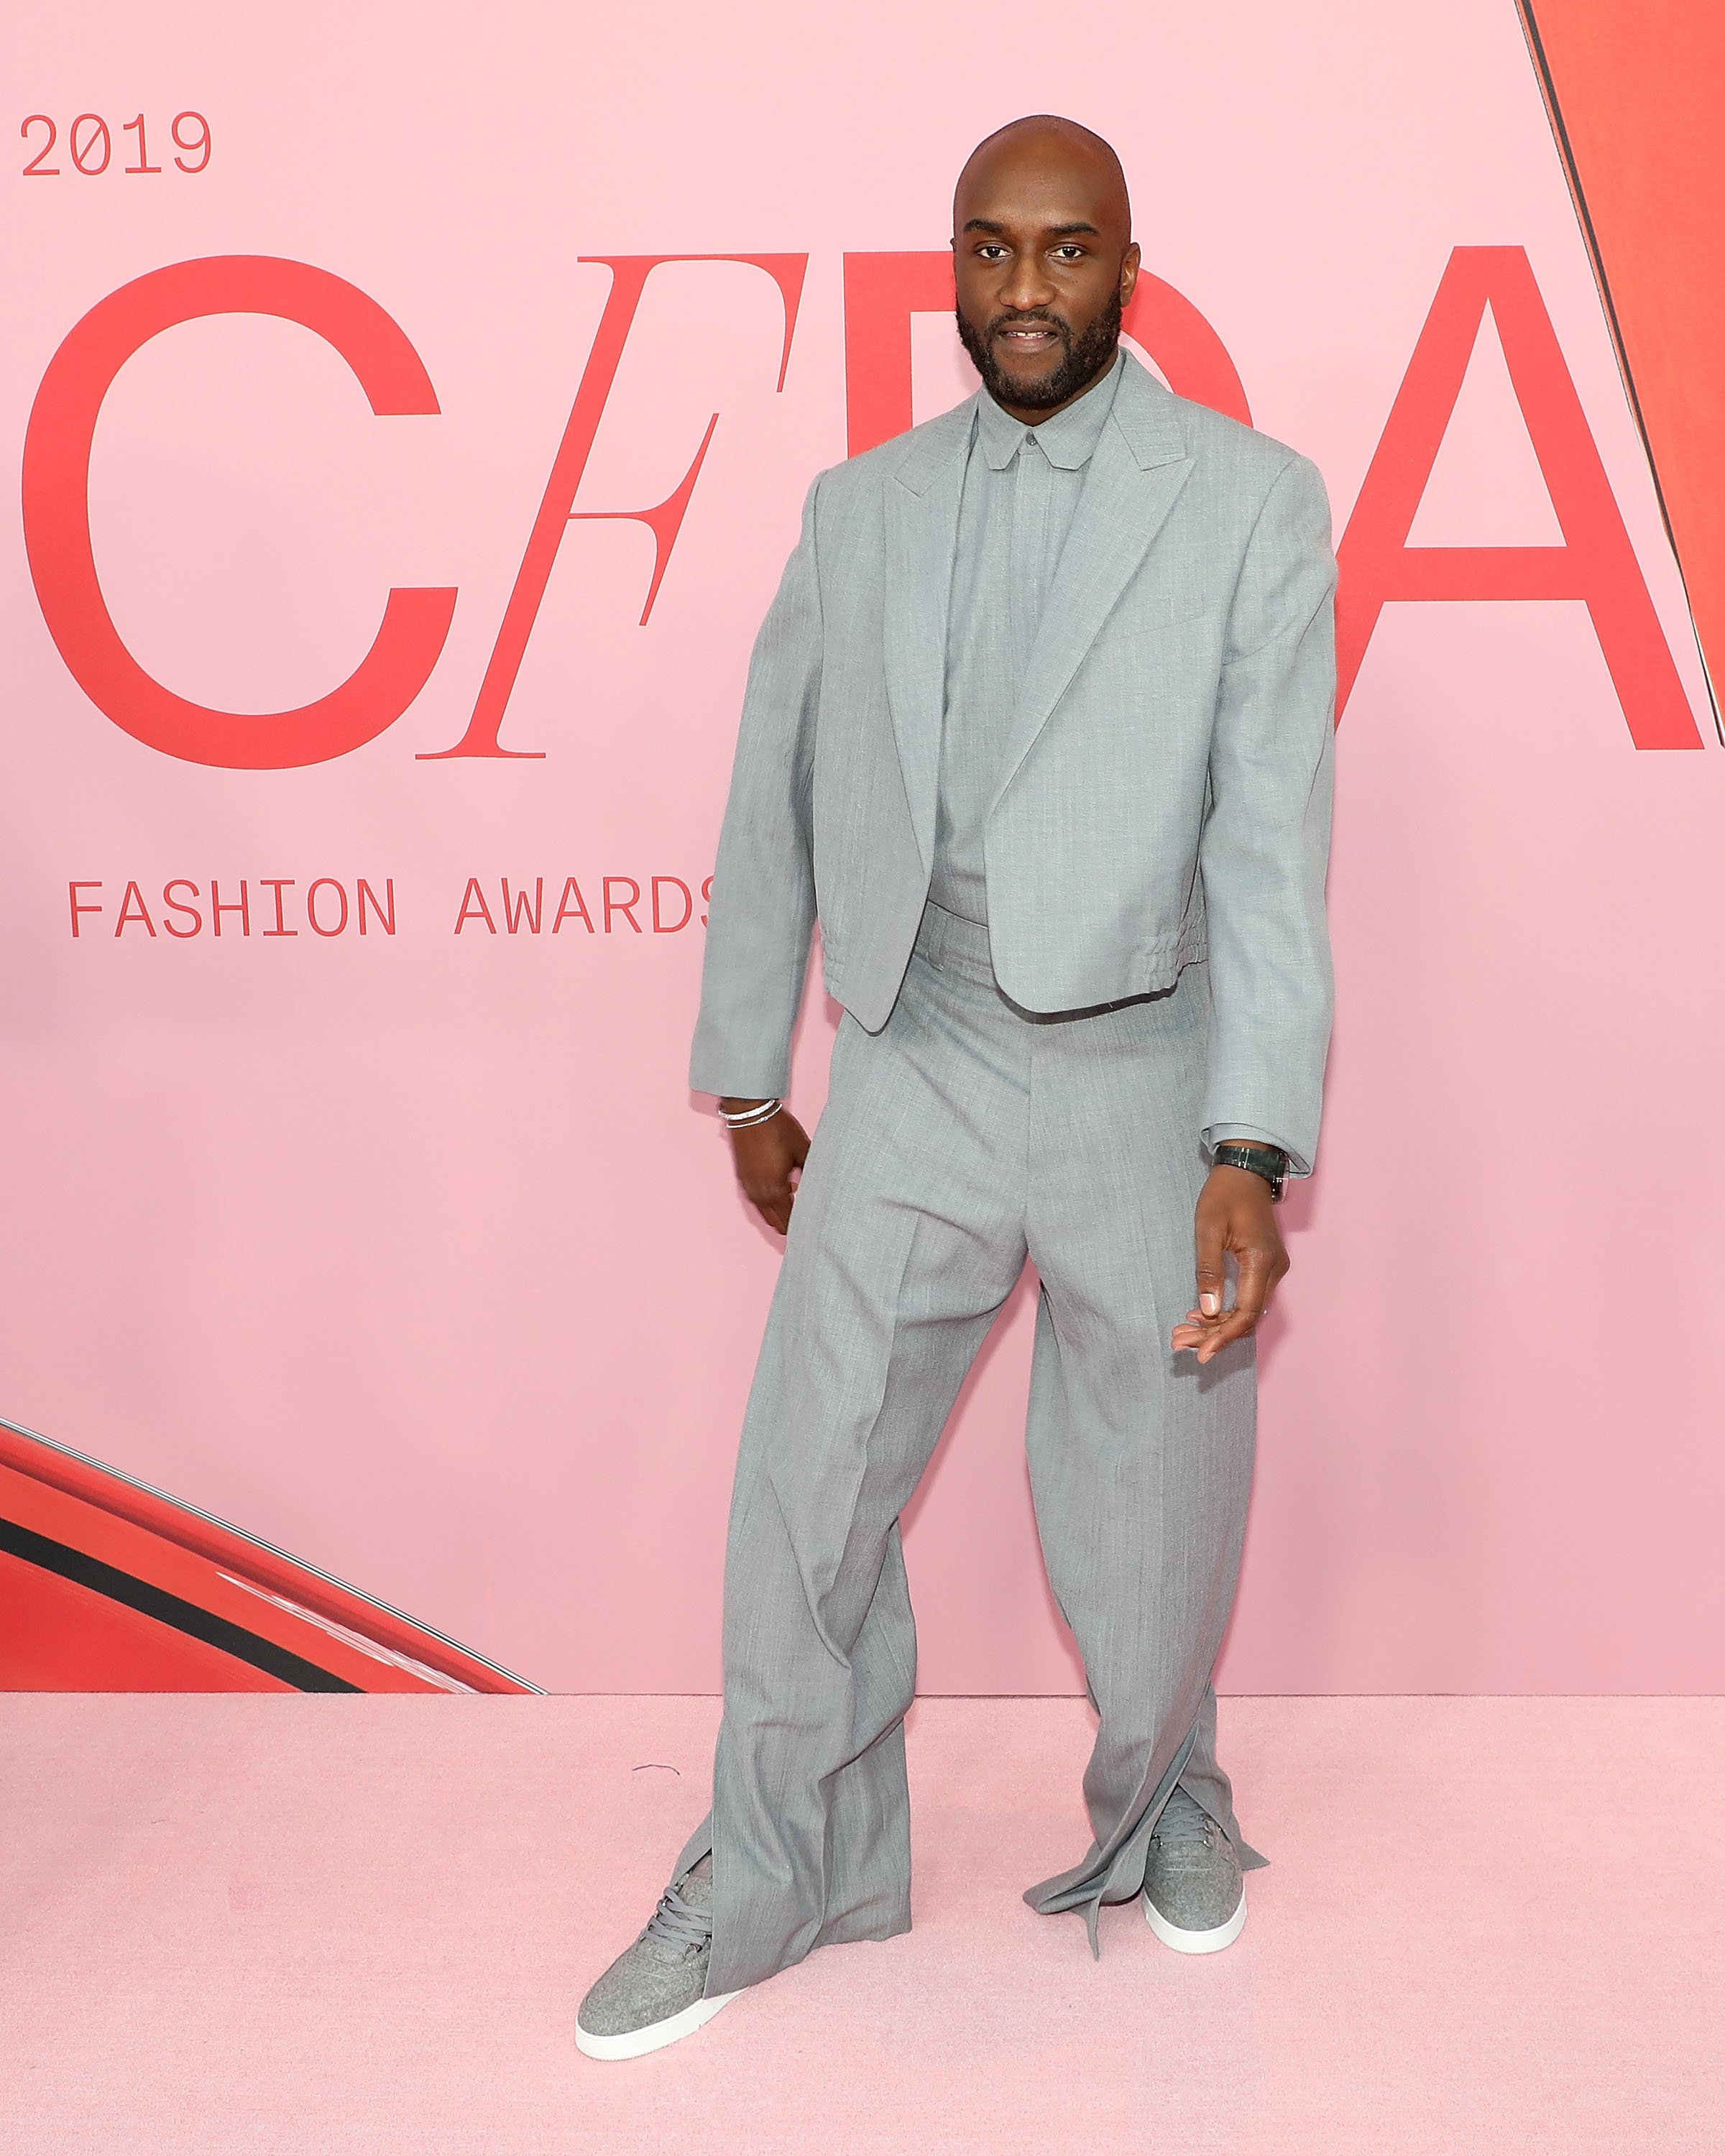 Virgil Abloh attends the 2019 CFDA Fashion Awards at the Brooklyn Museum of Art on June 03, 2019 in New York City. | Photo: Getty Images